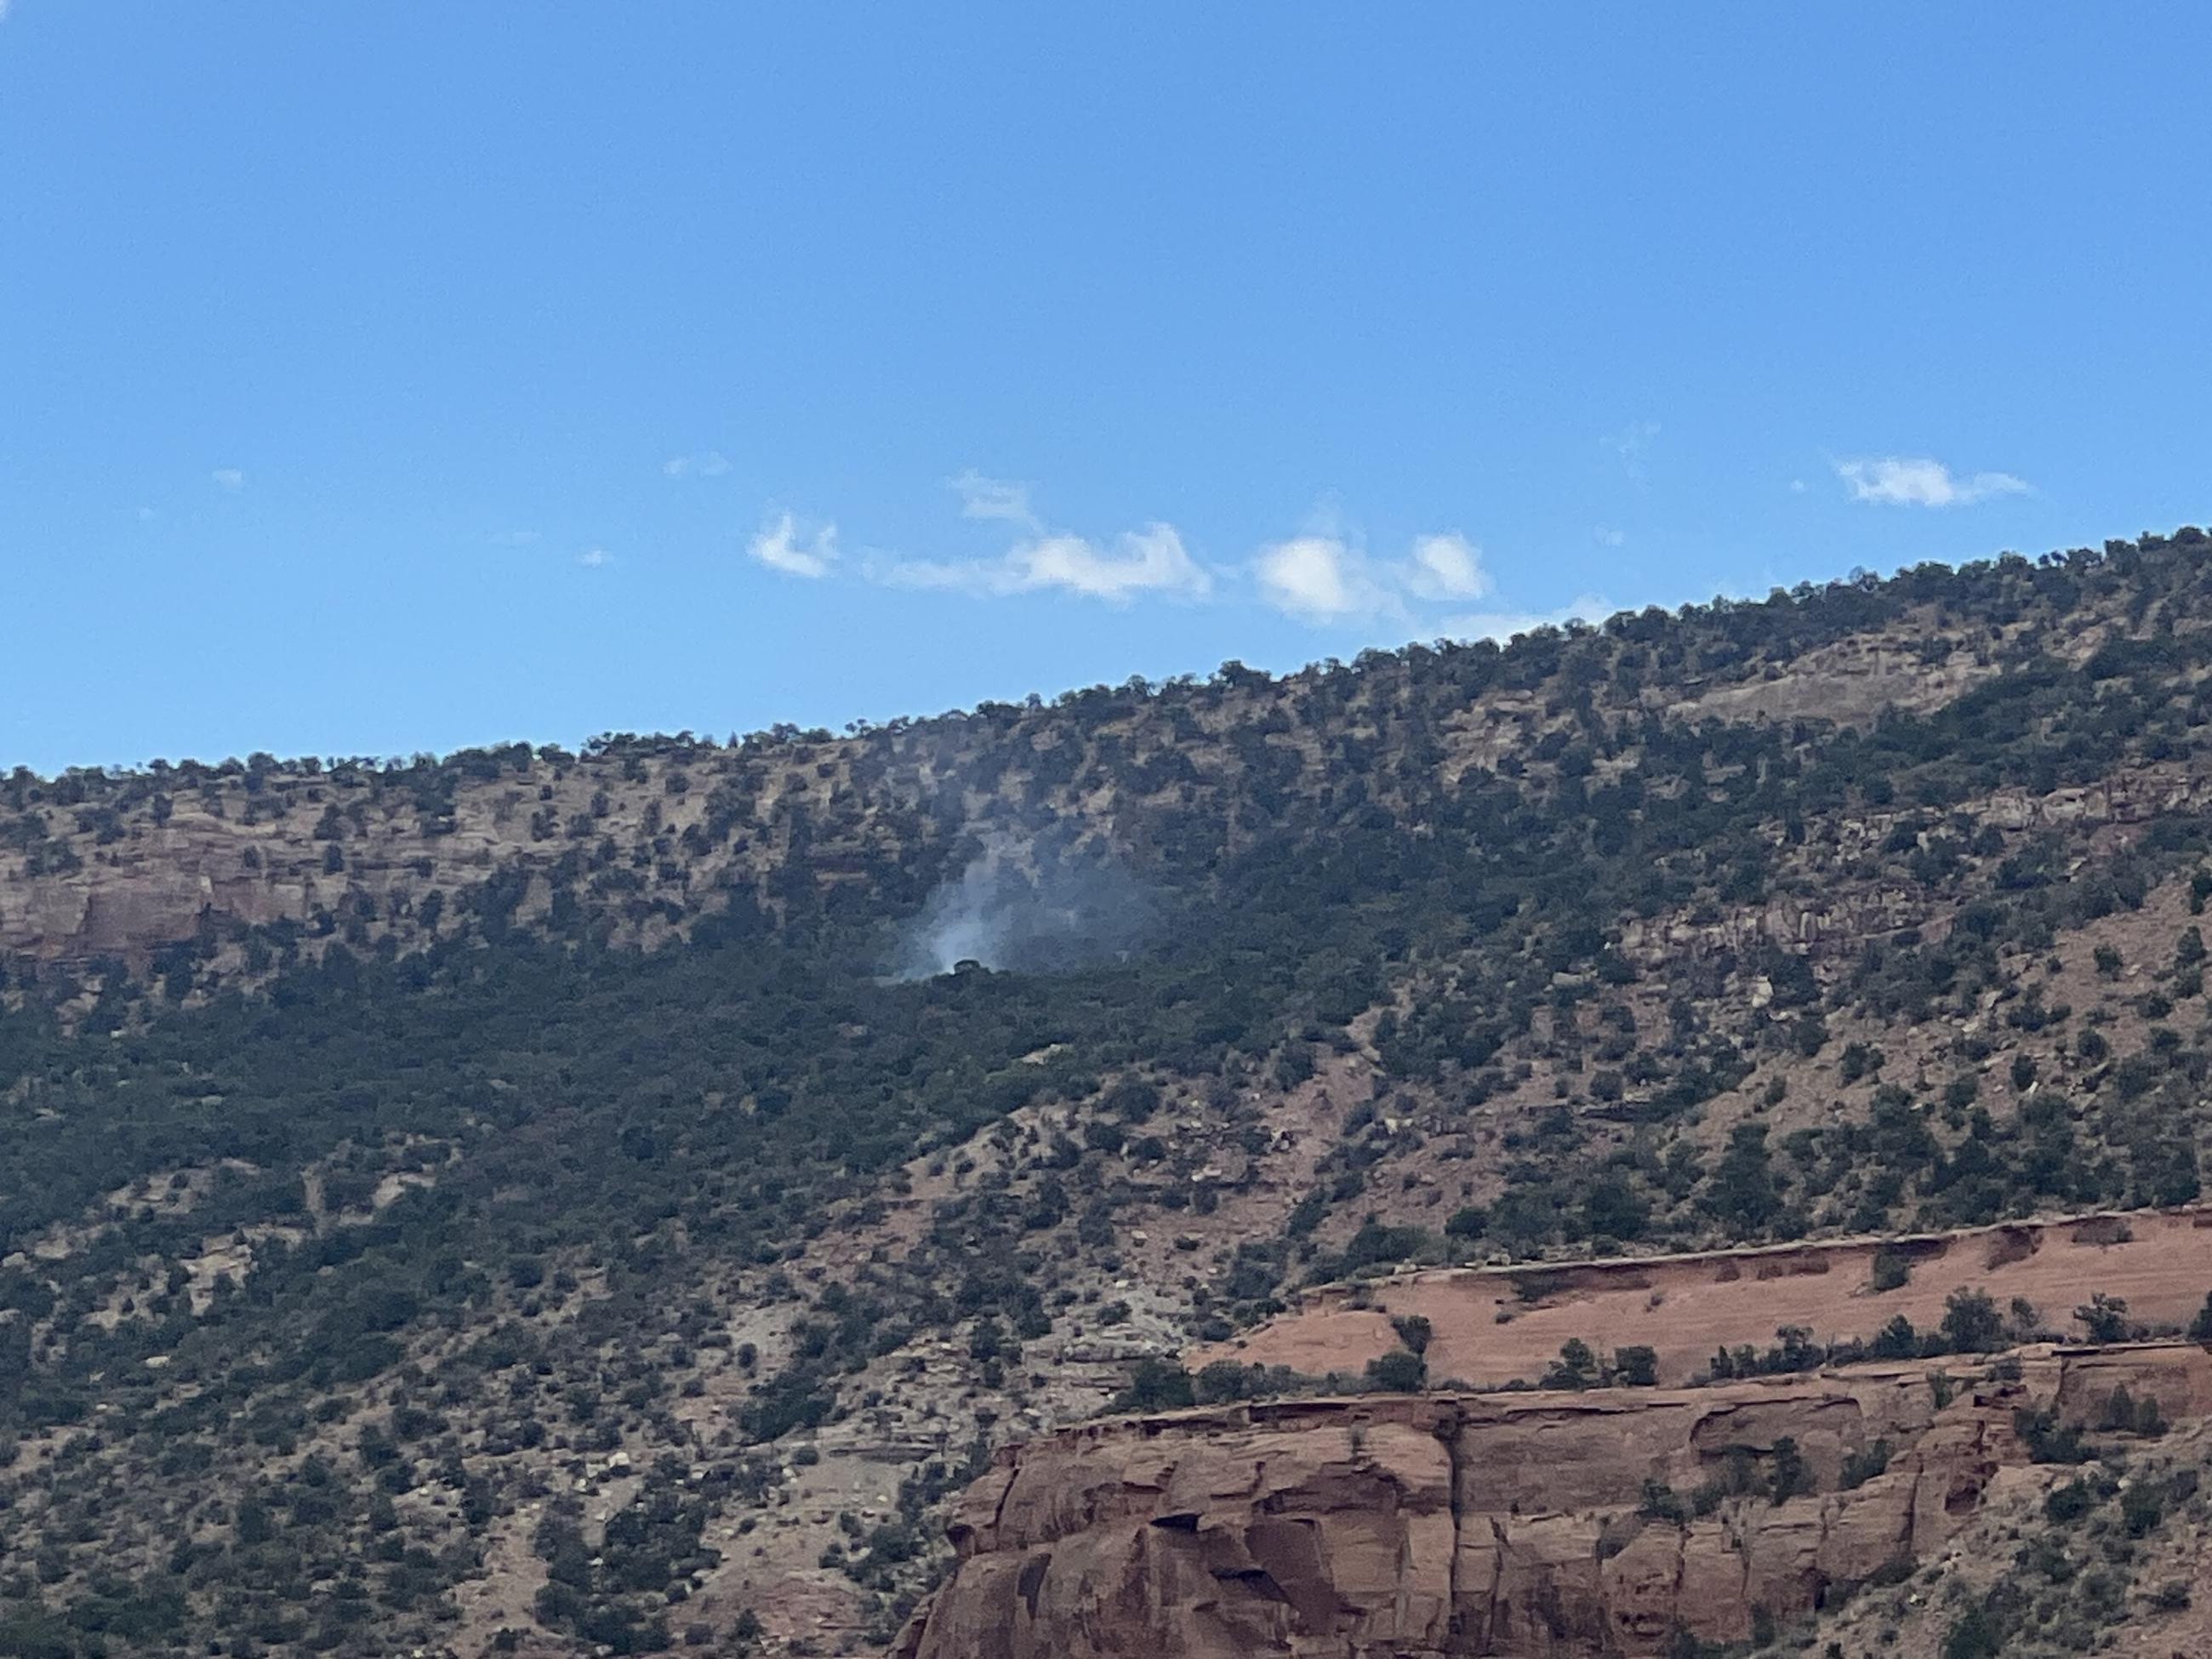 This is a photo of the Little Mesa Fire on the day it was first detected, which presents as a wisp of smoke in pinion/juniper forest on the slope of Little Canyon.